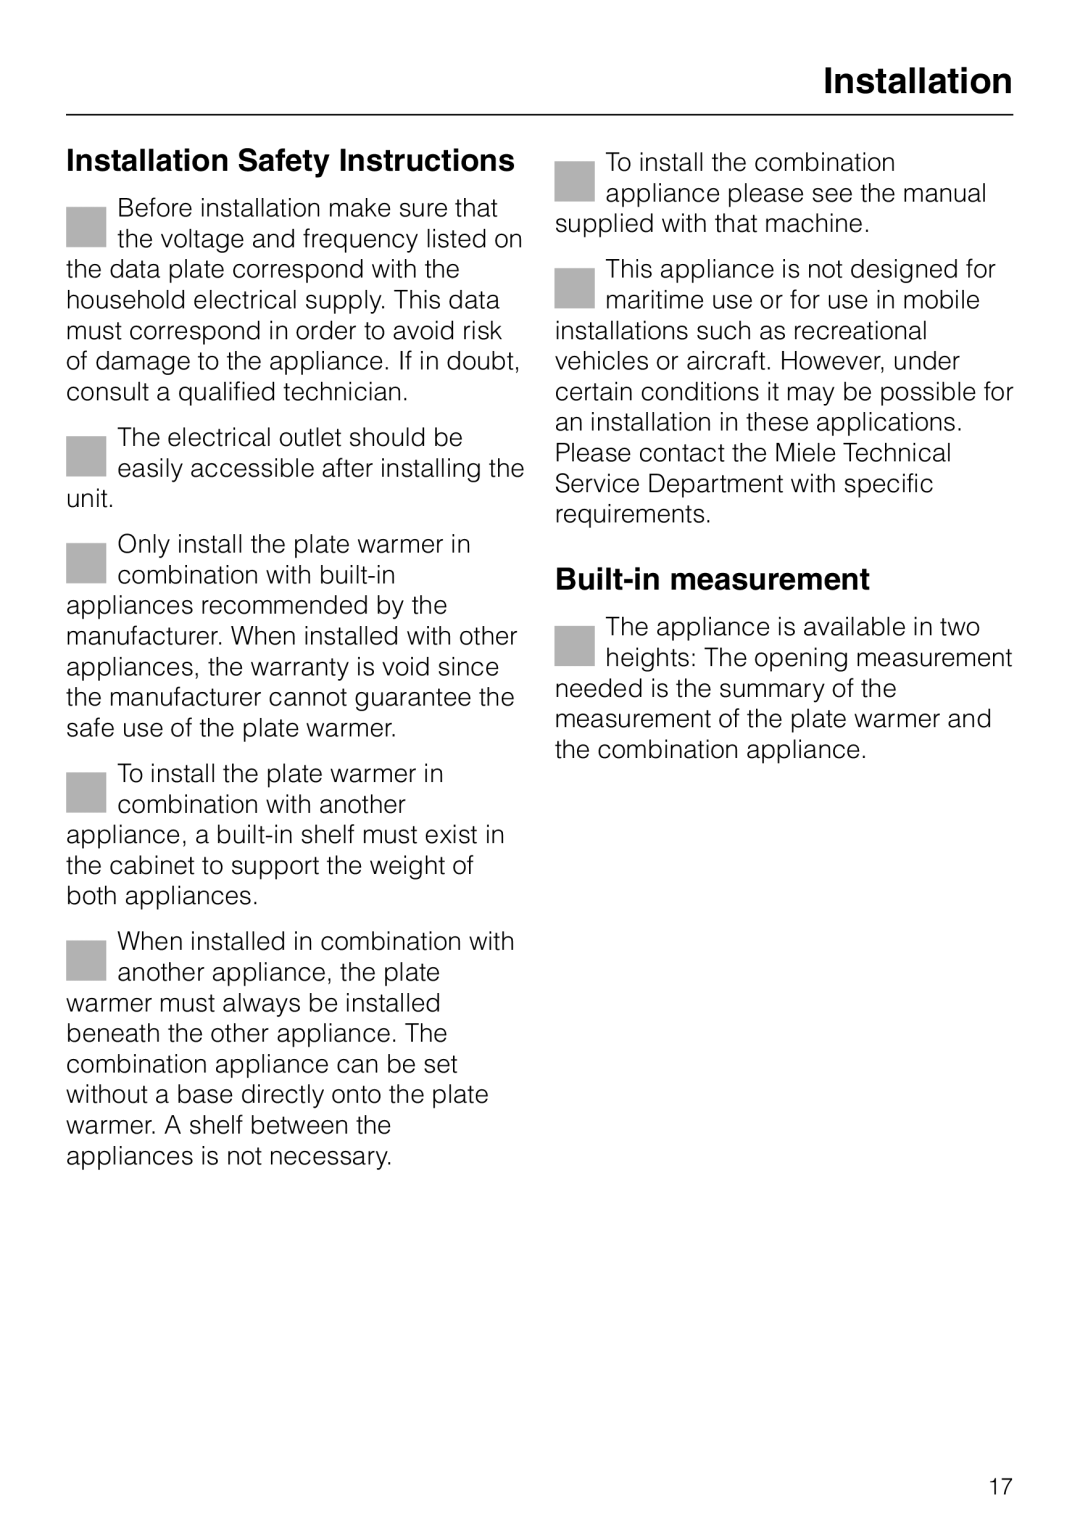 Miele EGW4060-14 operating instructions Installation Safety Instructions, Built-inmeasurement 